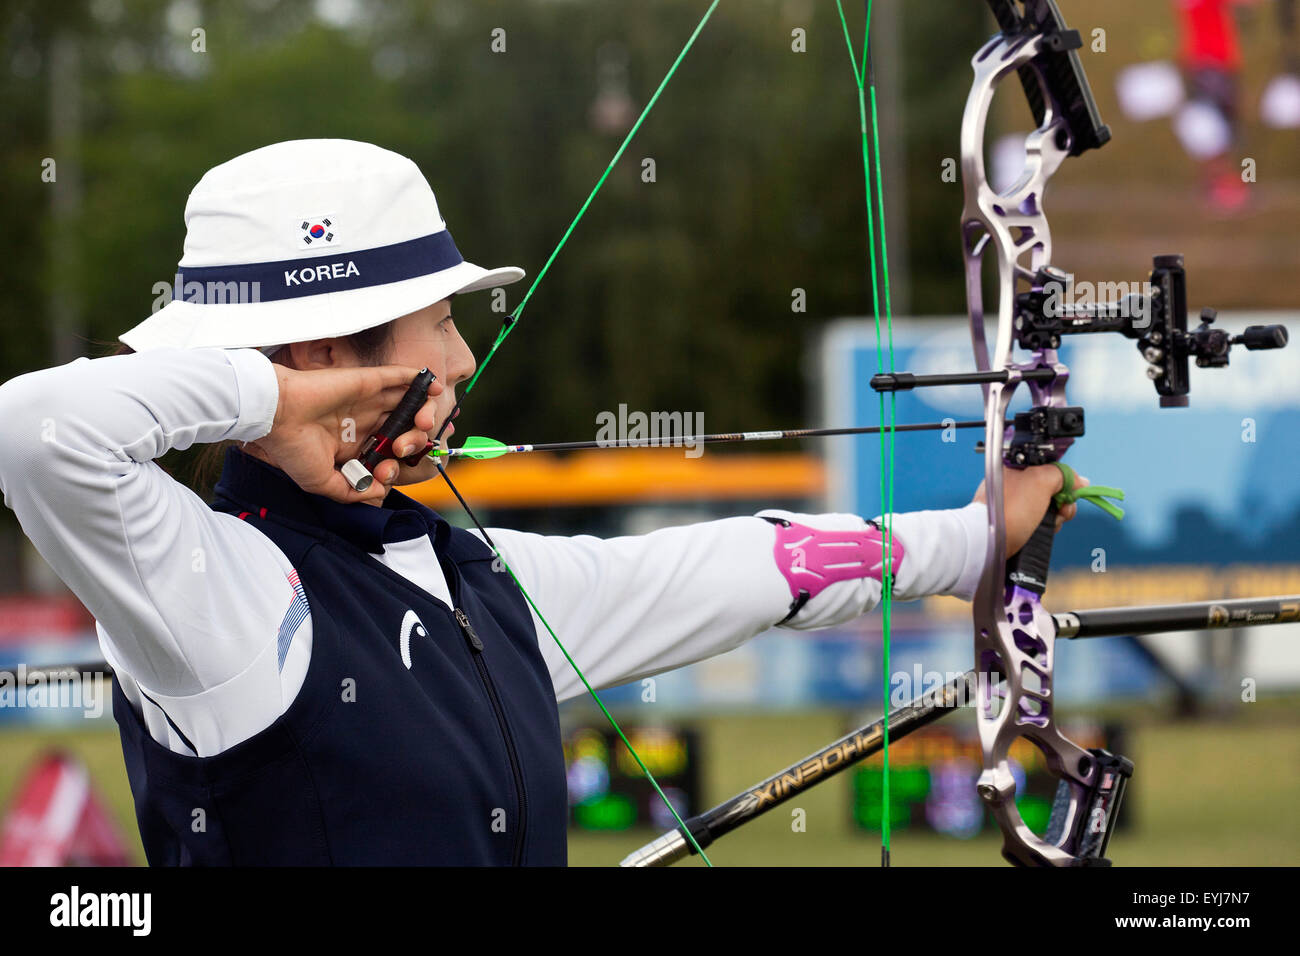 Copenhagen, Denmark, July 30th, 2015: Korean archer Yong Hee Choi competes in the World Archery Championships in Copenhagen during Thursday's individual matches  in compound bow. Credit:  OJPHOTOS/Alamy Live News Stock Photo